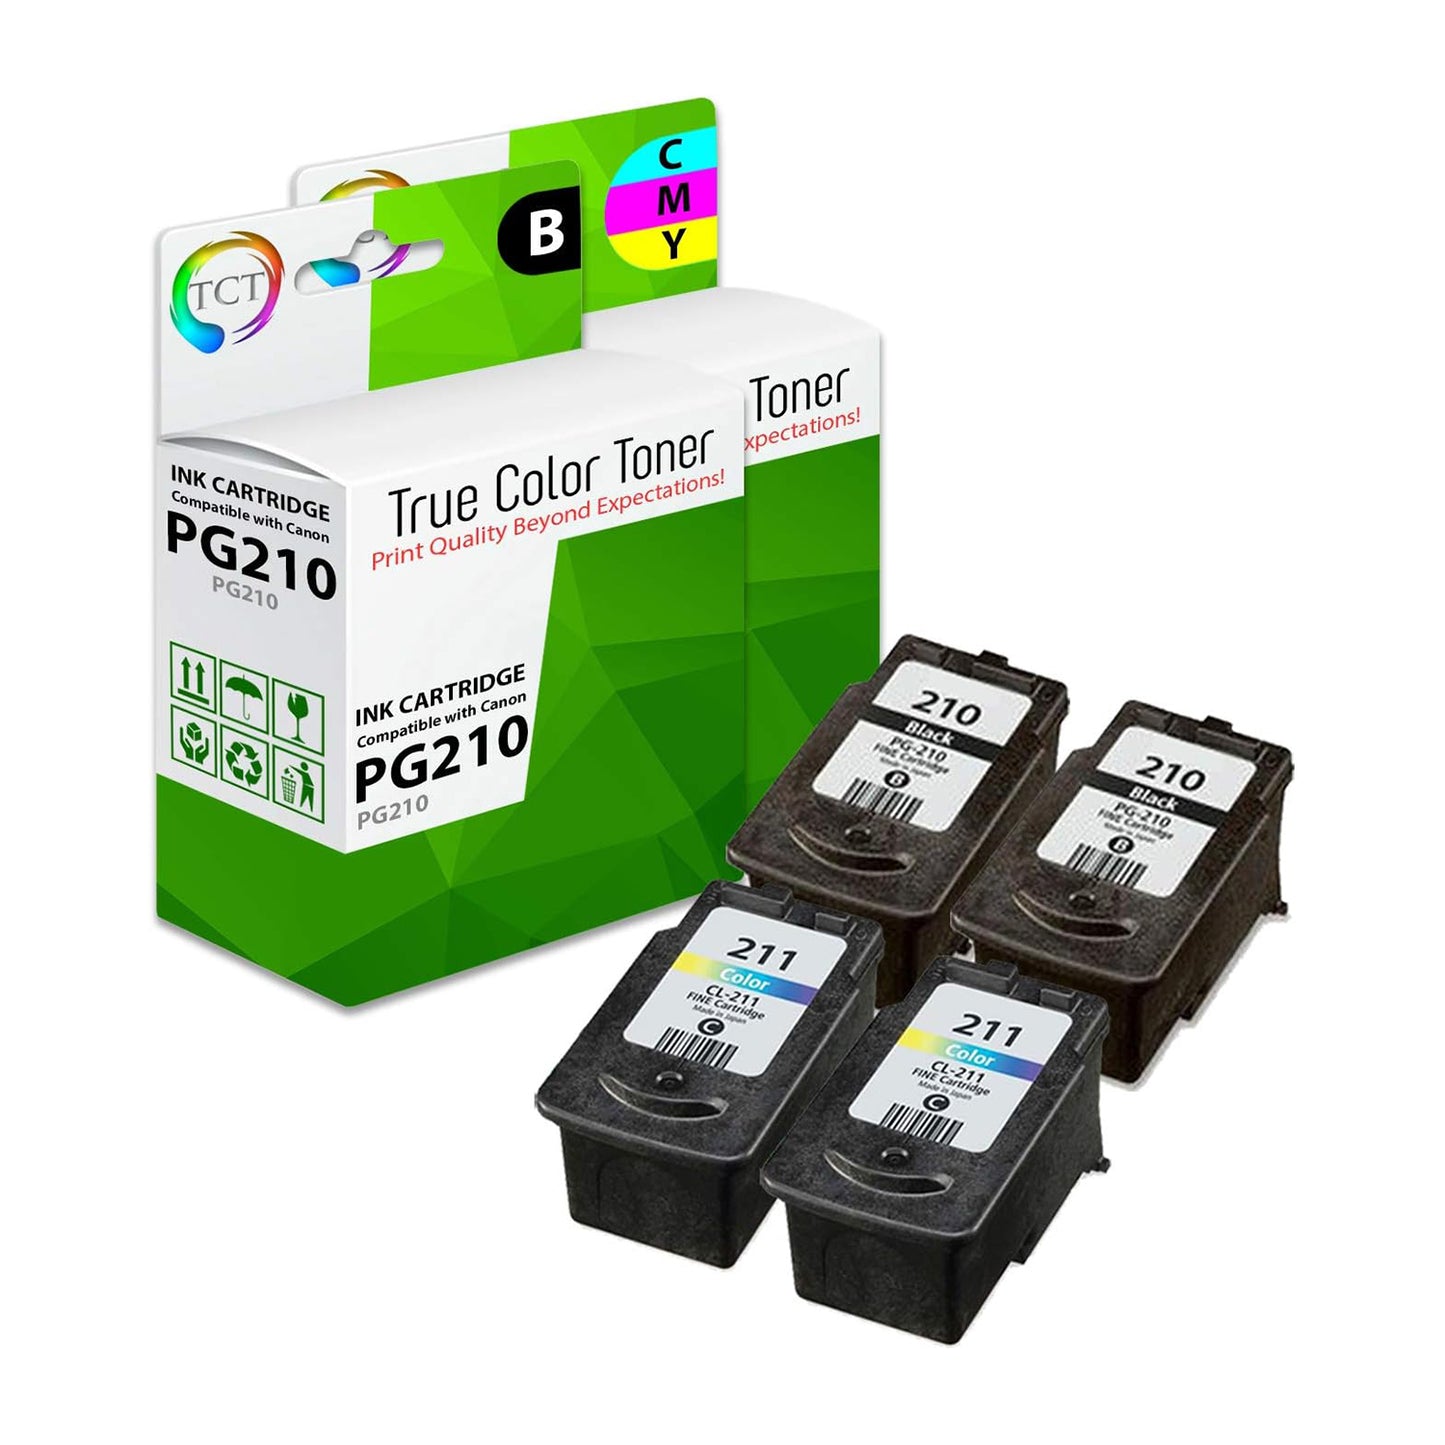 TCT Compatible Ink Cartridge Replacement for the Canon PG- 210 CL-211 Series - 4 Pack (BK, CL)